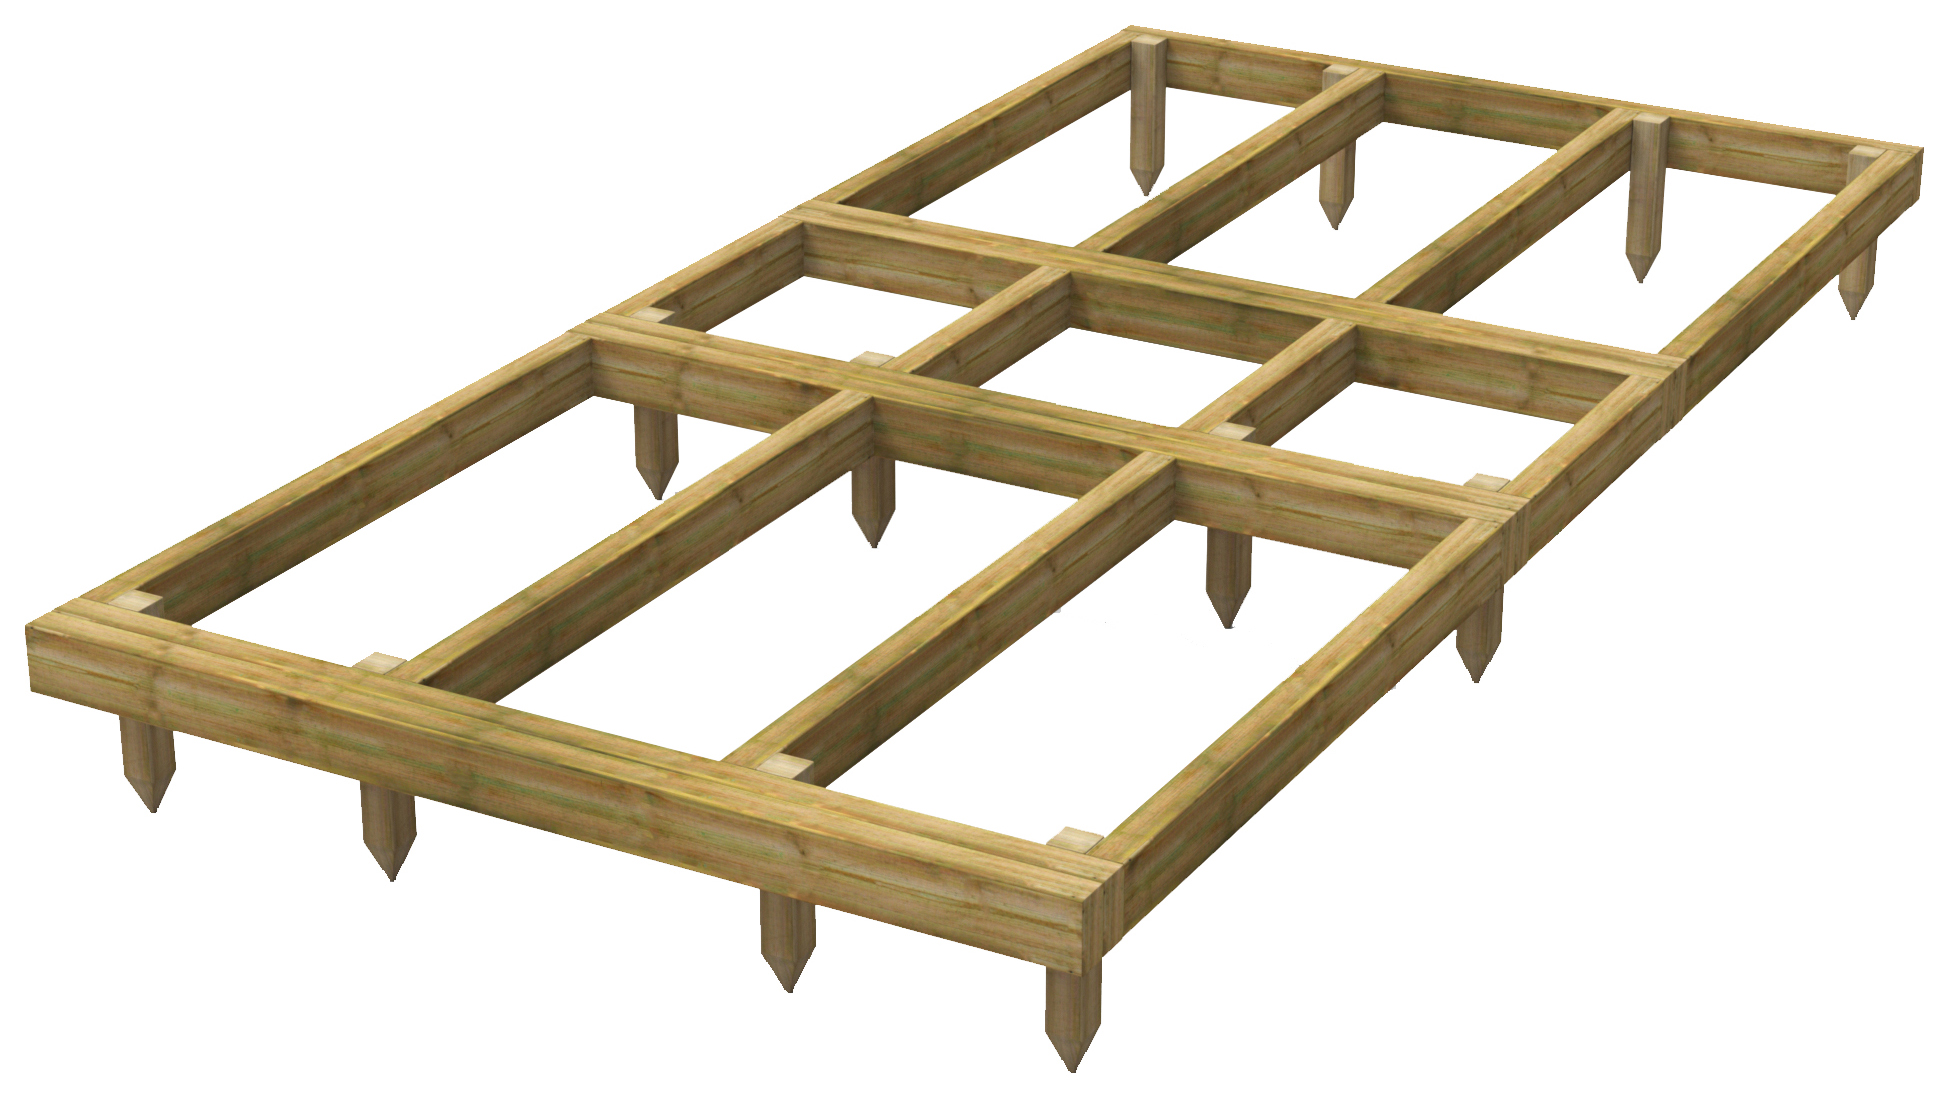 Image of Power Sheds 10 x 5ft Pressure Treated Garden Building Base Kit